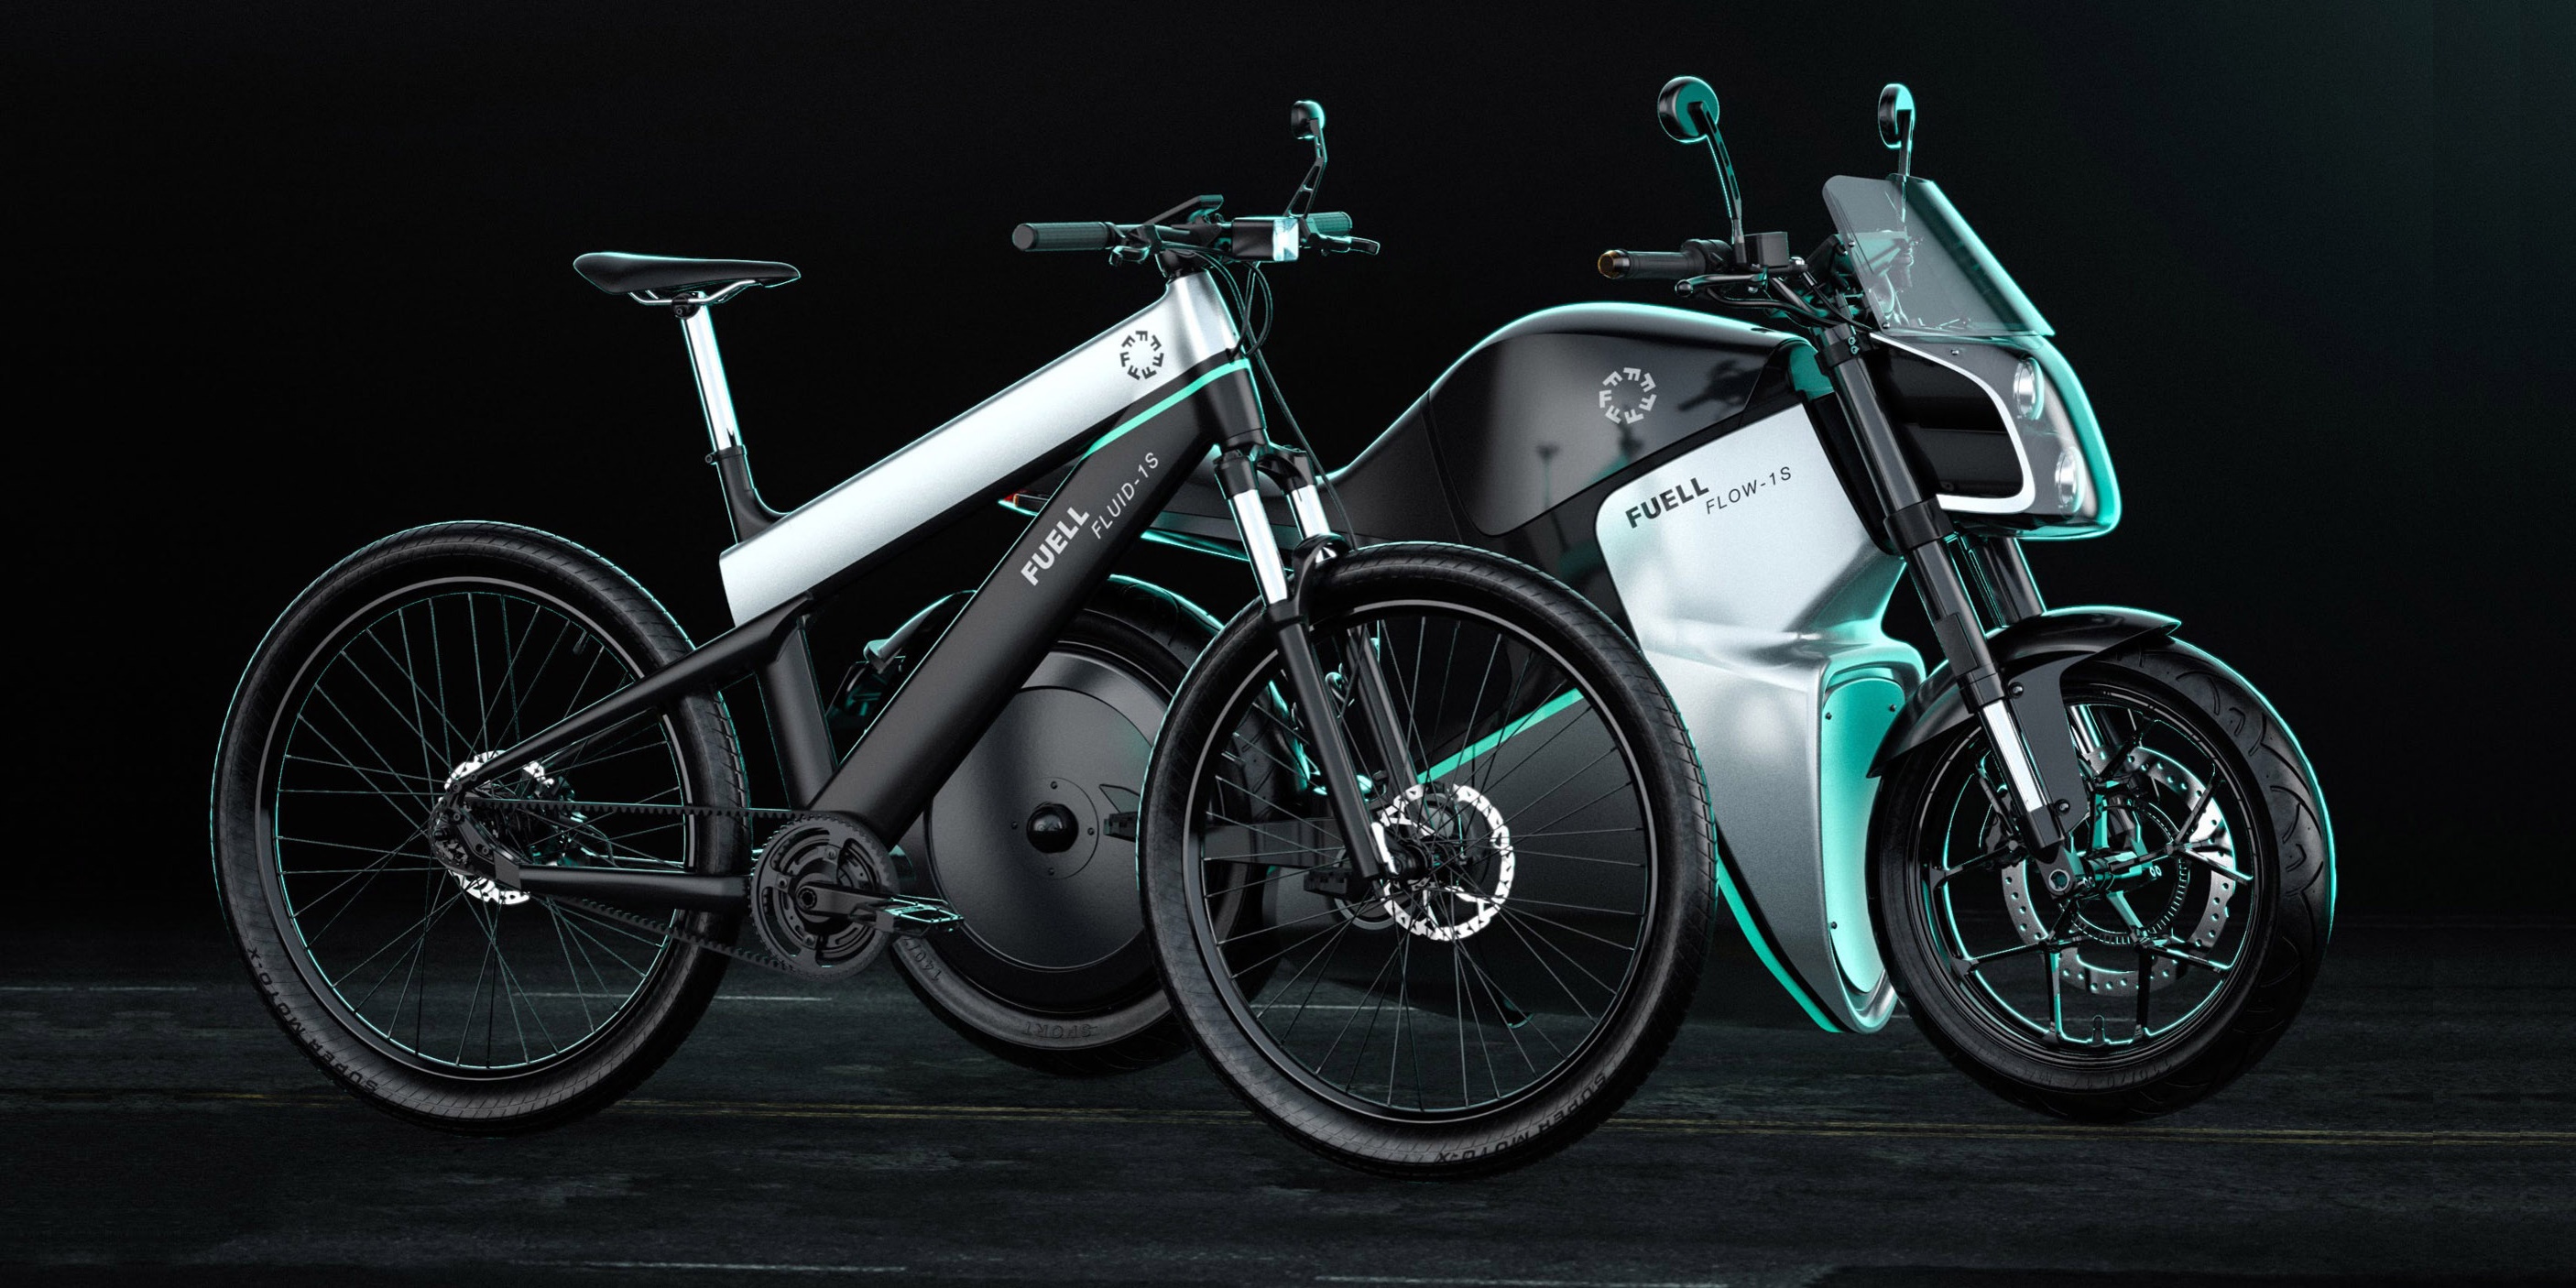 Motorcycle visionary Erik Buell’s new Fuell Fluid electric bicycle with 200 km range begins sales